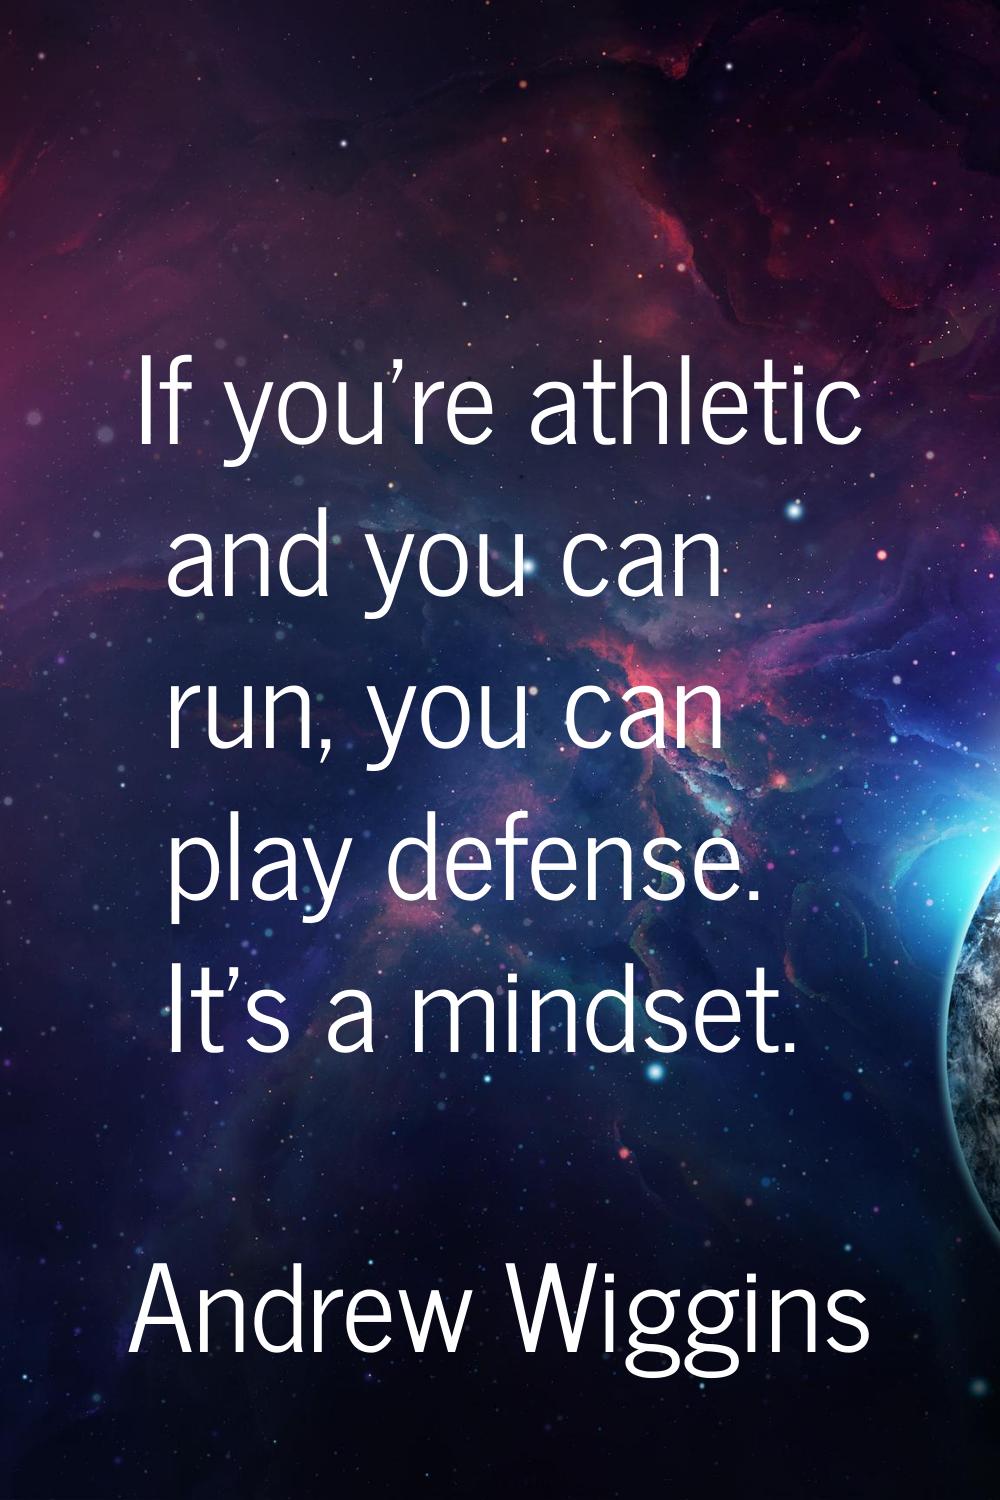 If you're athletic and you can run, you can play defense. It's a mindset.